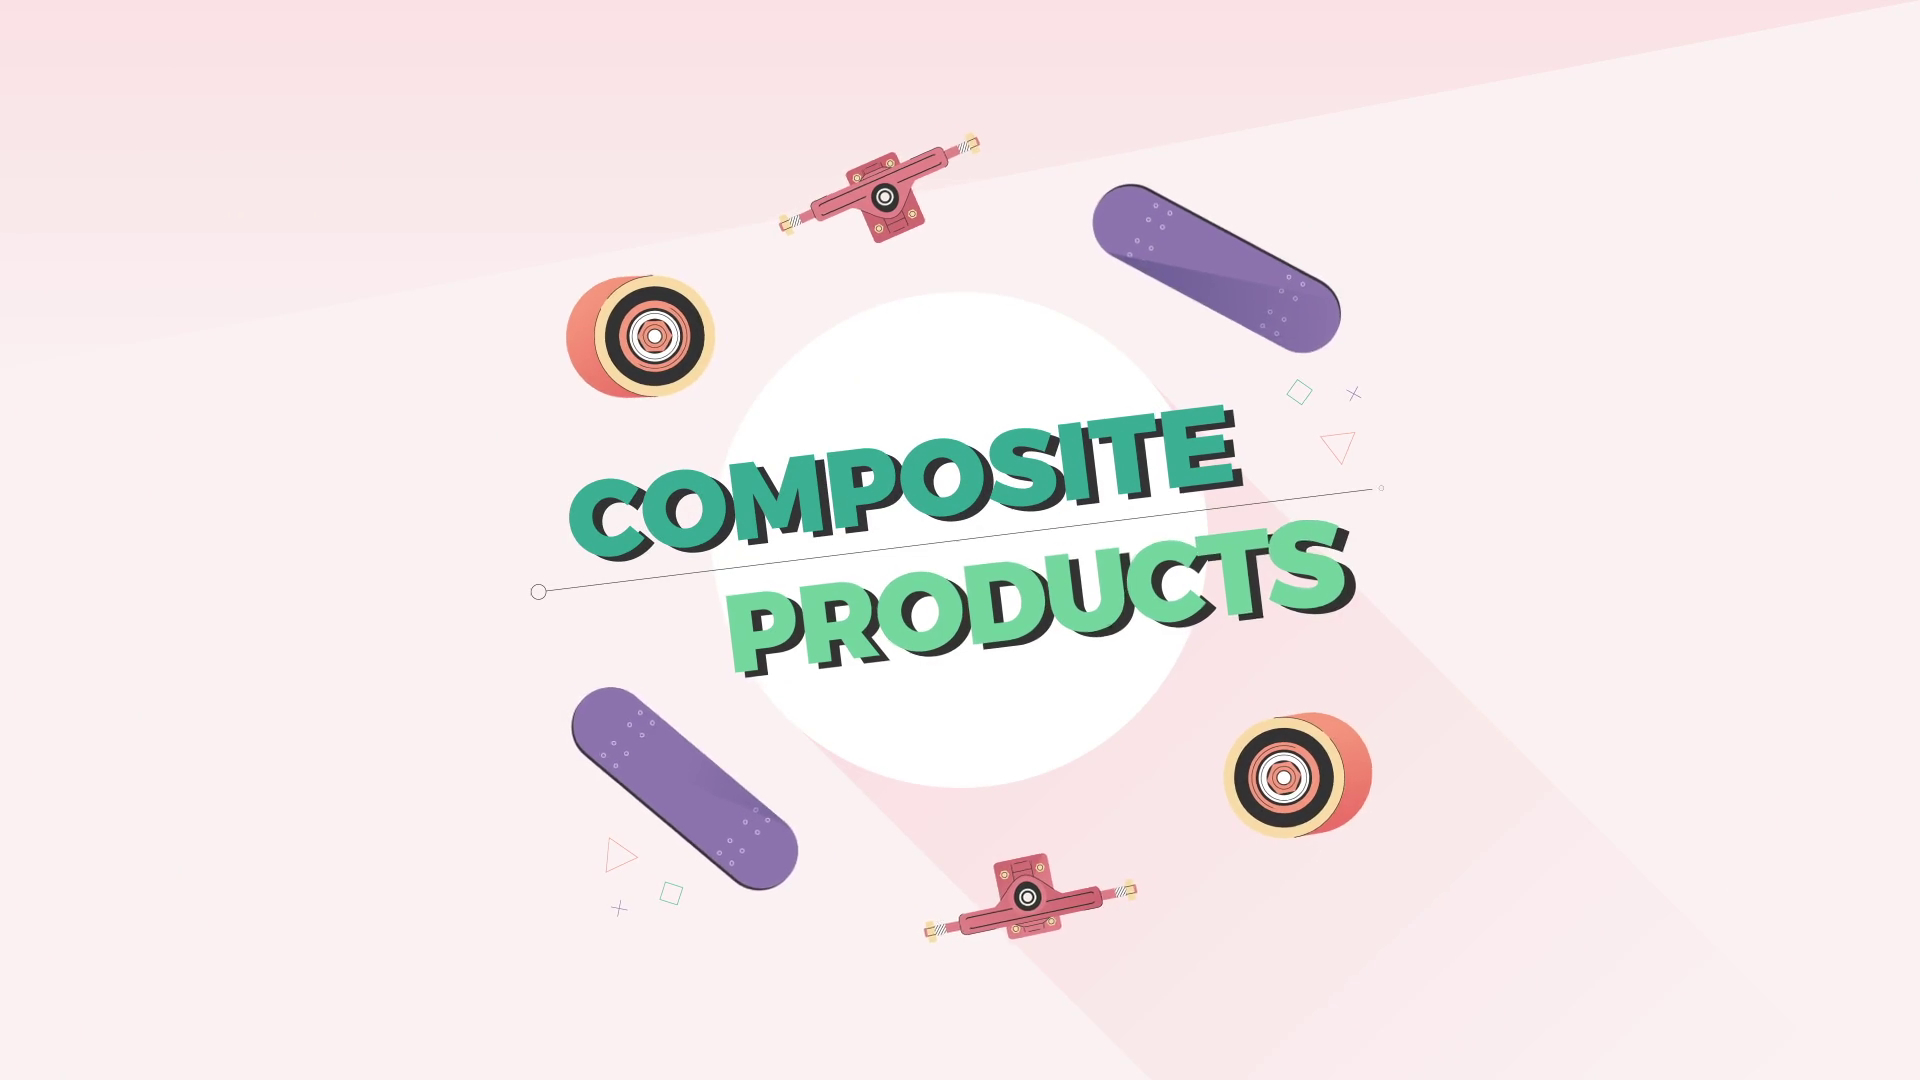 WooCommerce Composite Products v8.3.7